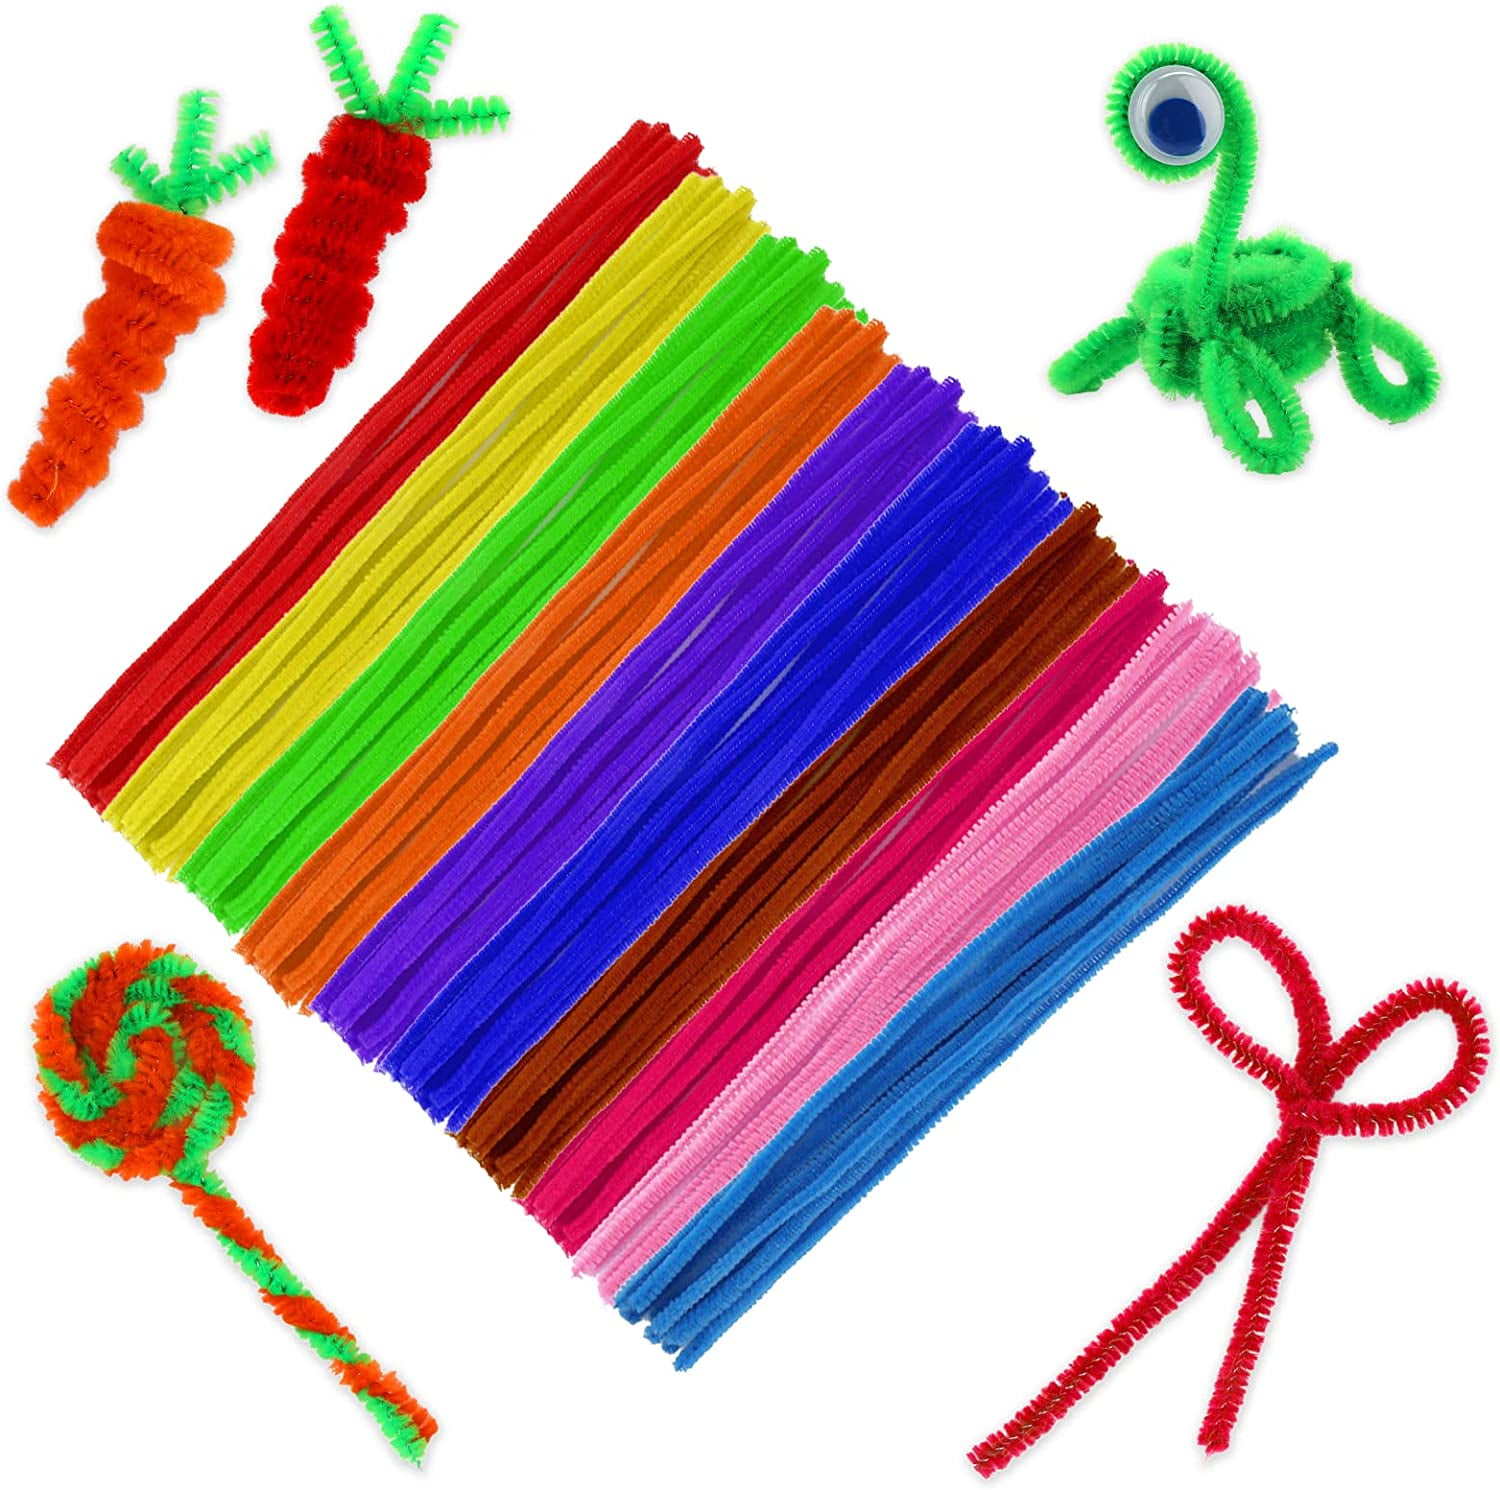 100 Pipe Cleaner Crafts from A to Z